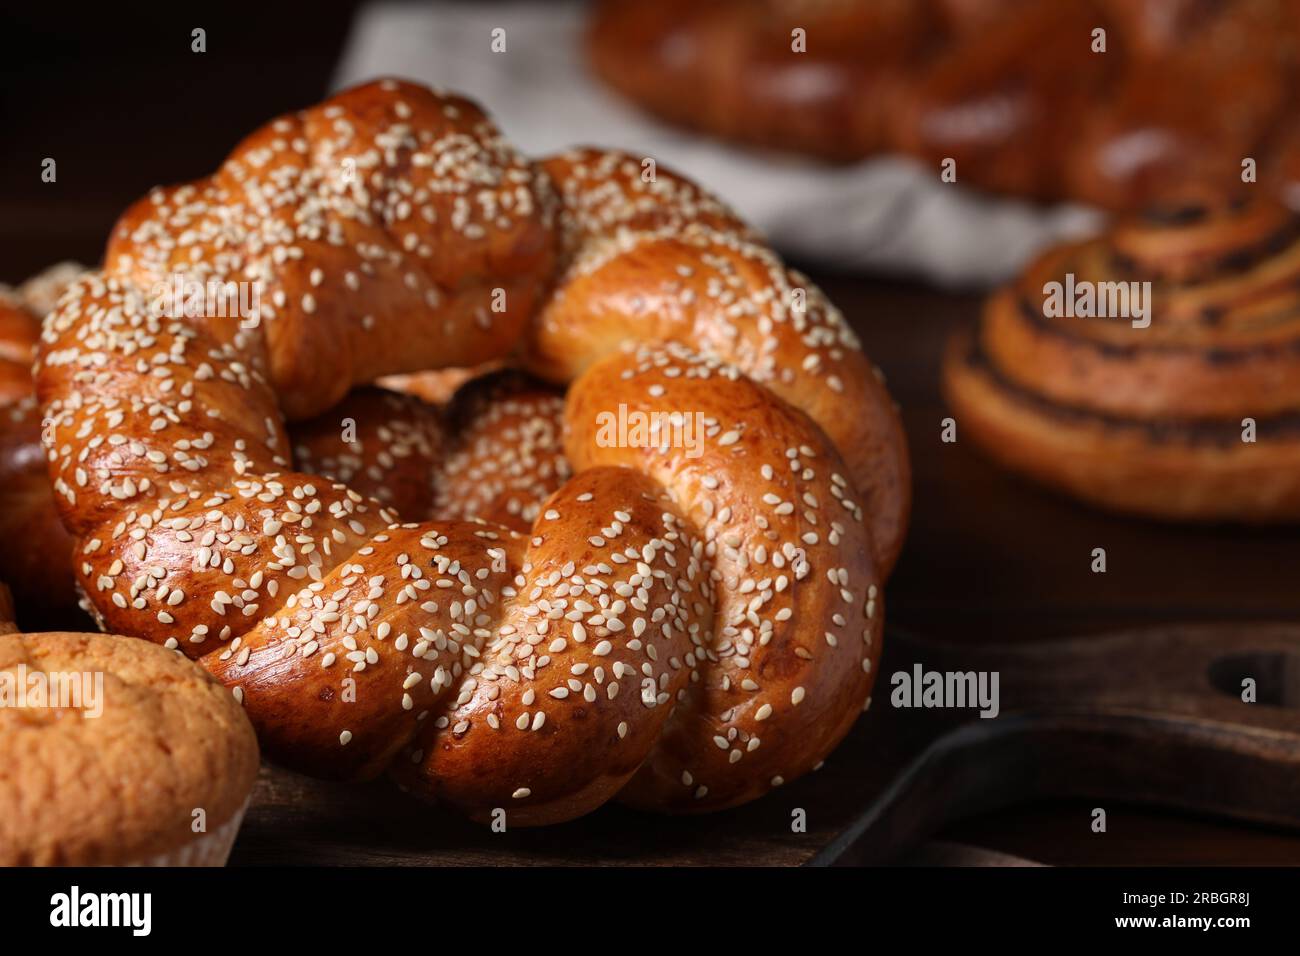 Freshly baked round braided bread and other pastries on table, closeup Stock Photo